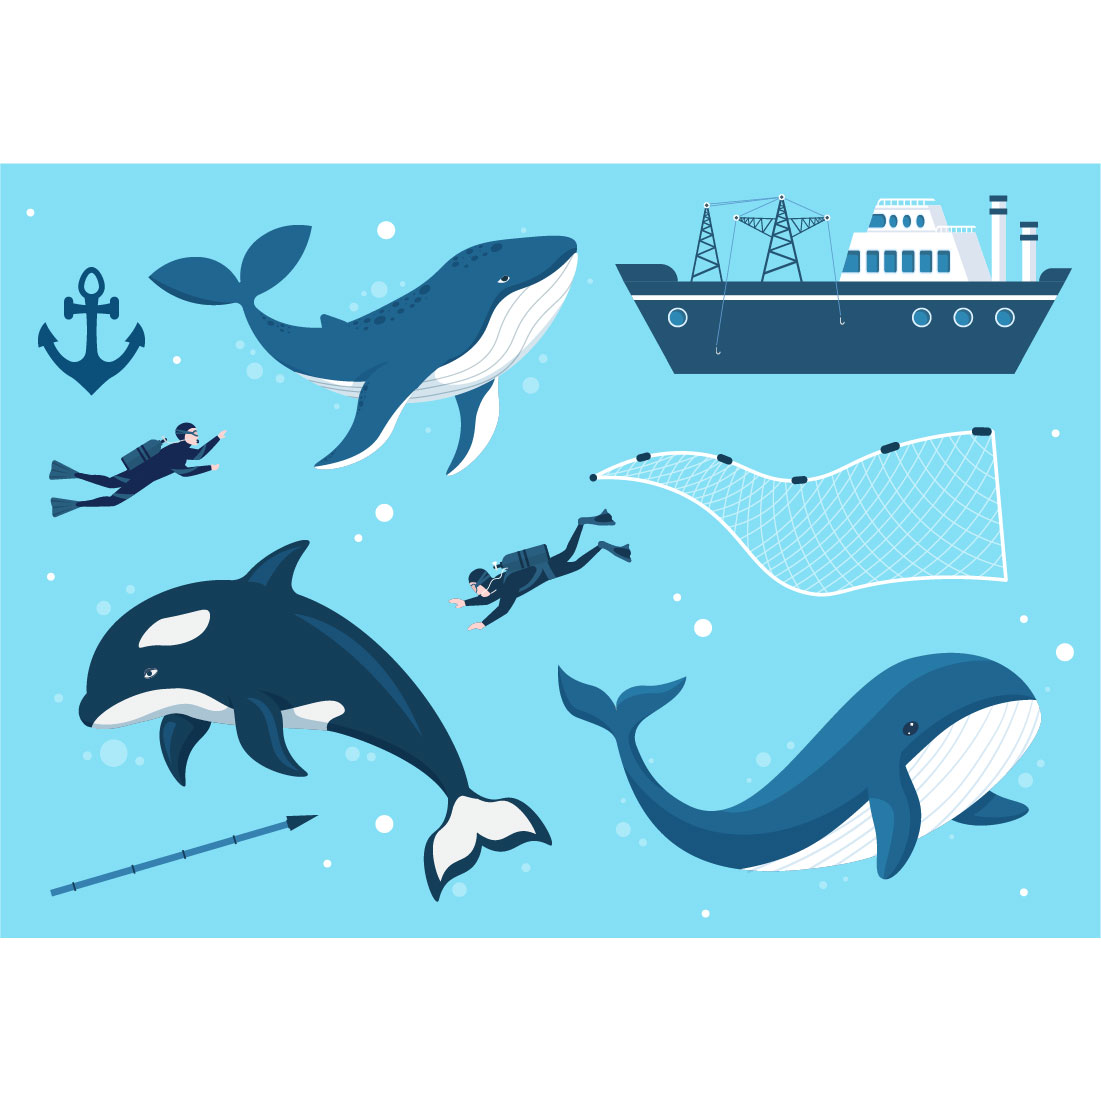 Whale Hunting Cartoon Illustration cover image.